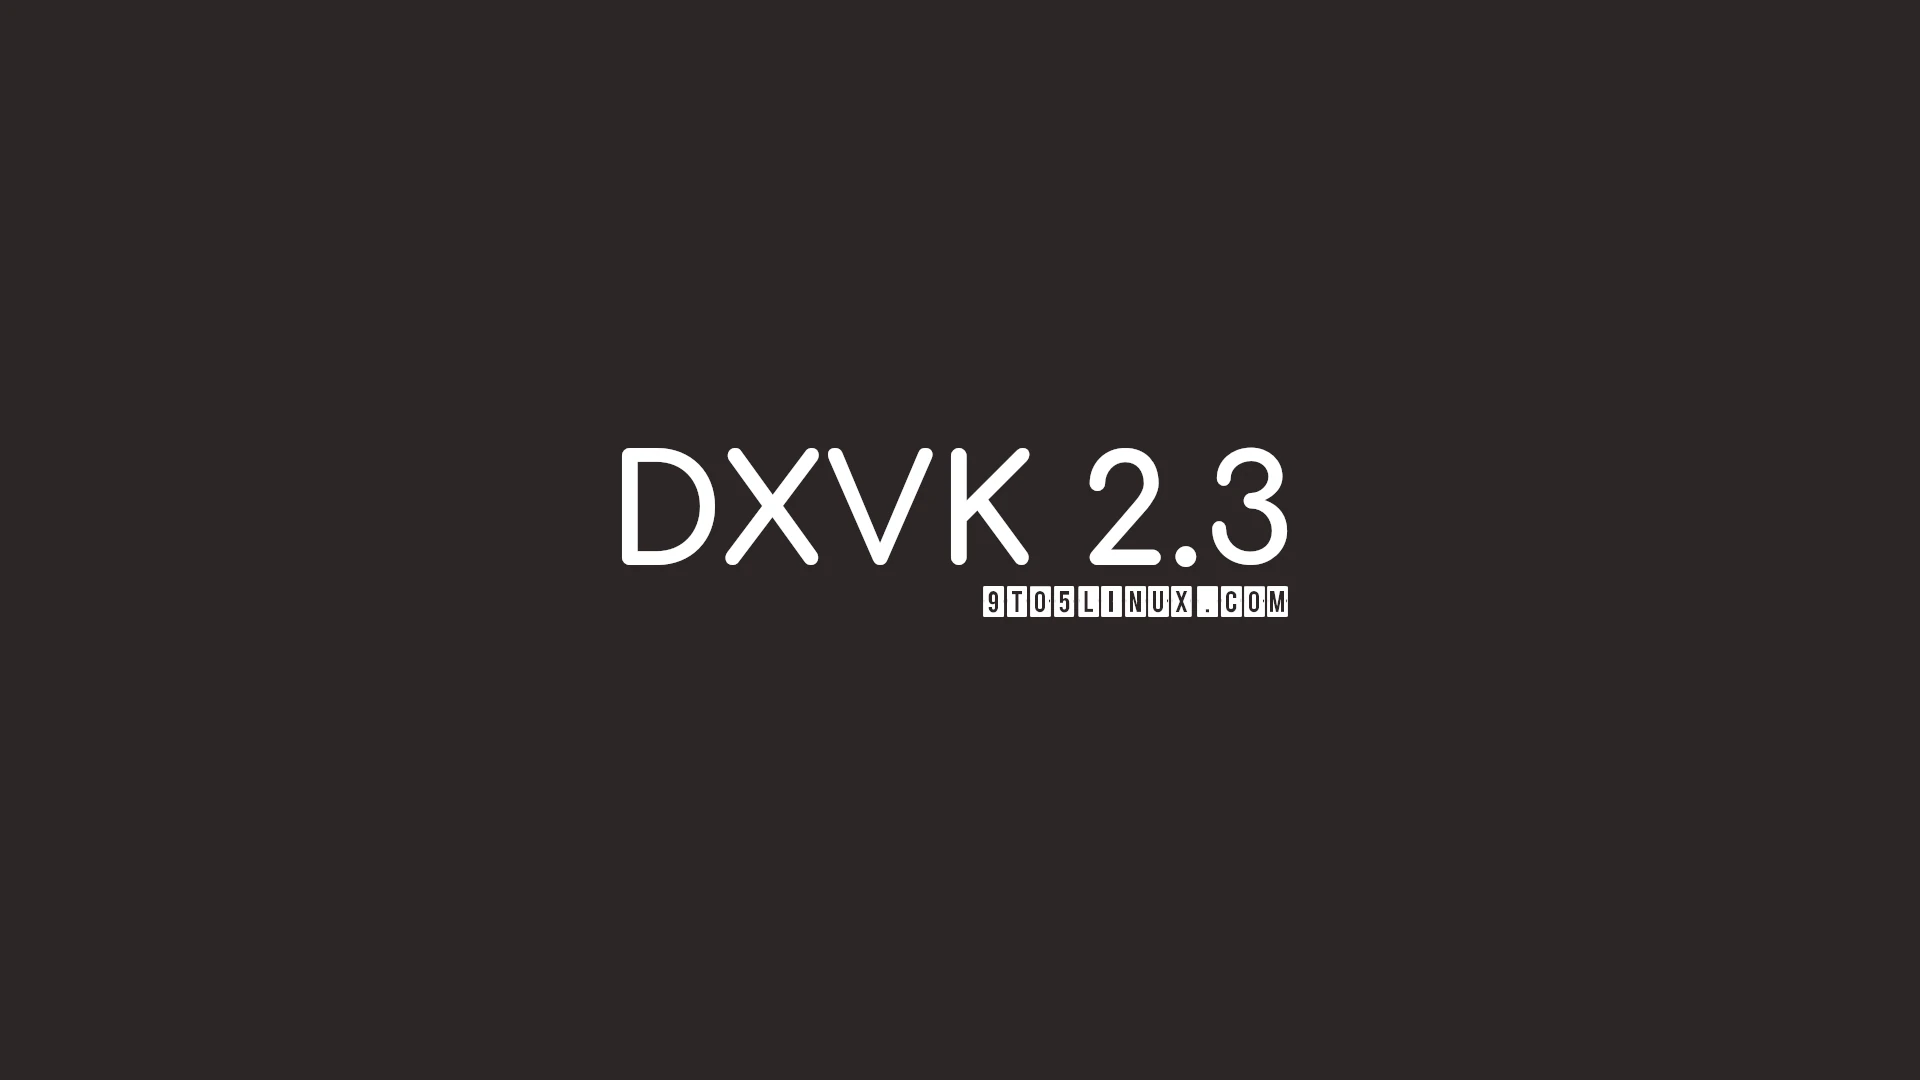 DXVK 2.3 Improves Performance in Tomb Raider Anniversary and Fixes Many Bugs